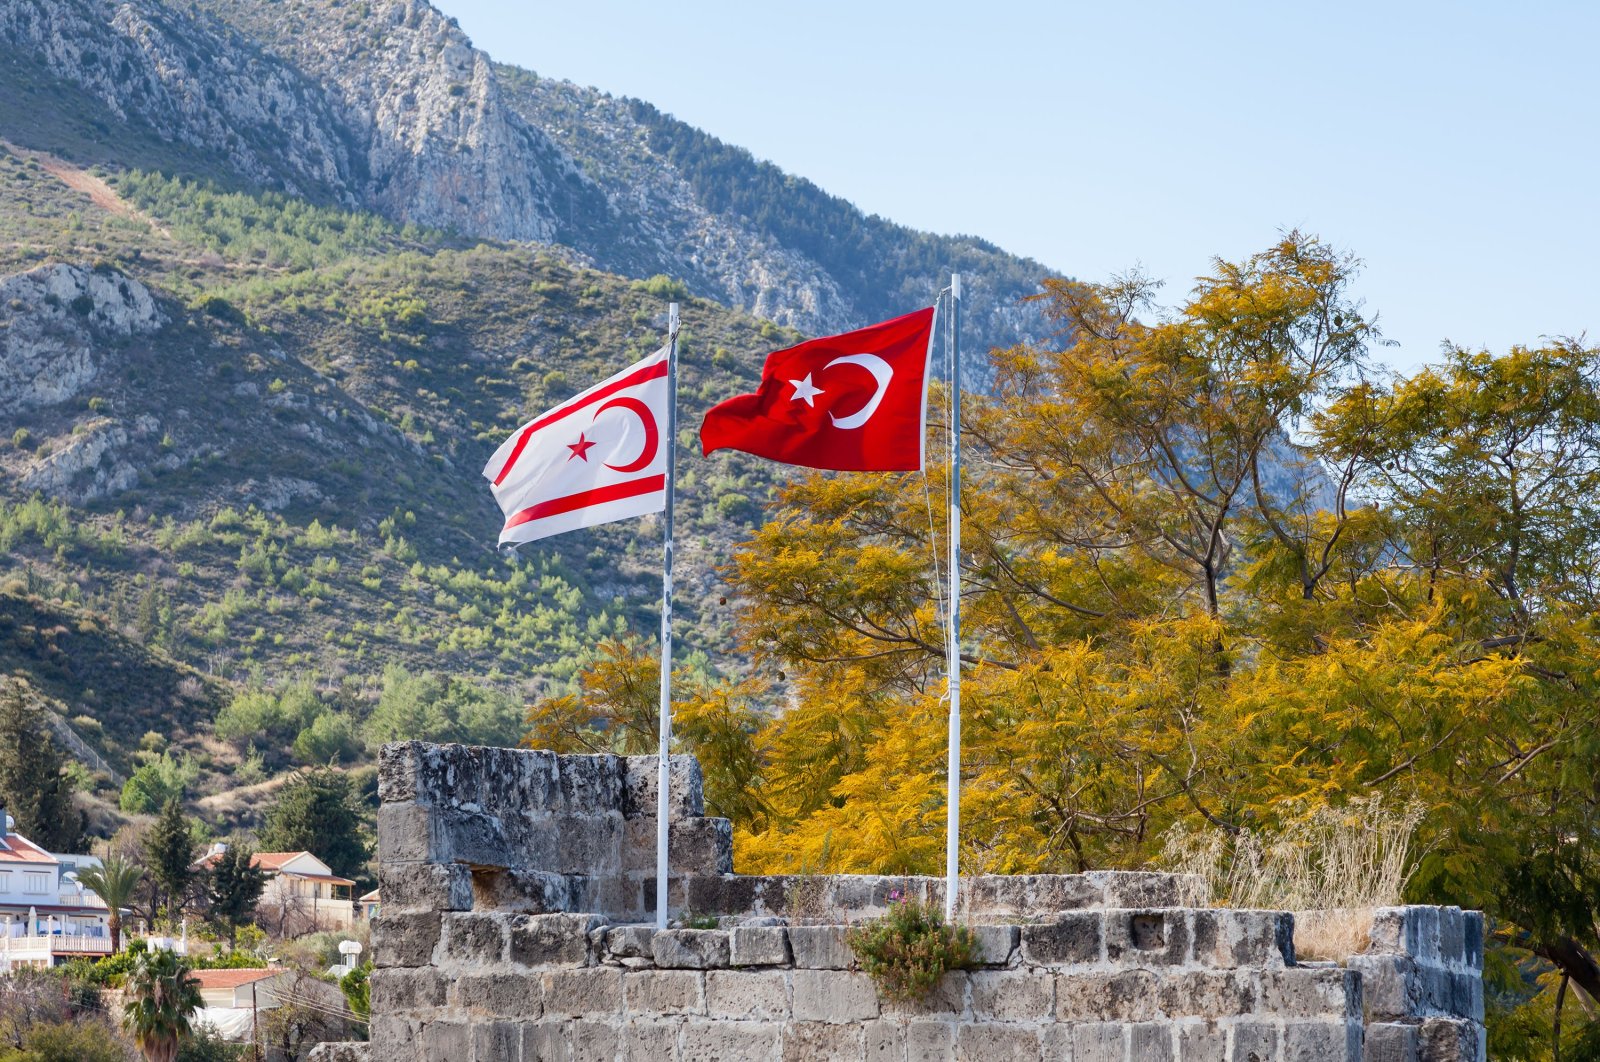 The flags of Turkey and the Turkish Republic of Northern Cyprus (TRNC) fly side by side at Bellapais Abbey in the TRNC, Jan. 27, 2016. (Photo by Shutterstock)